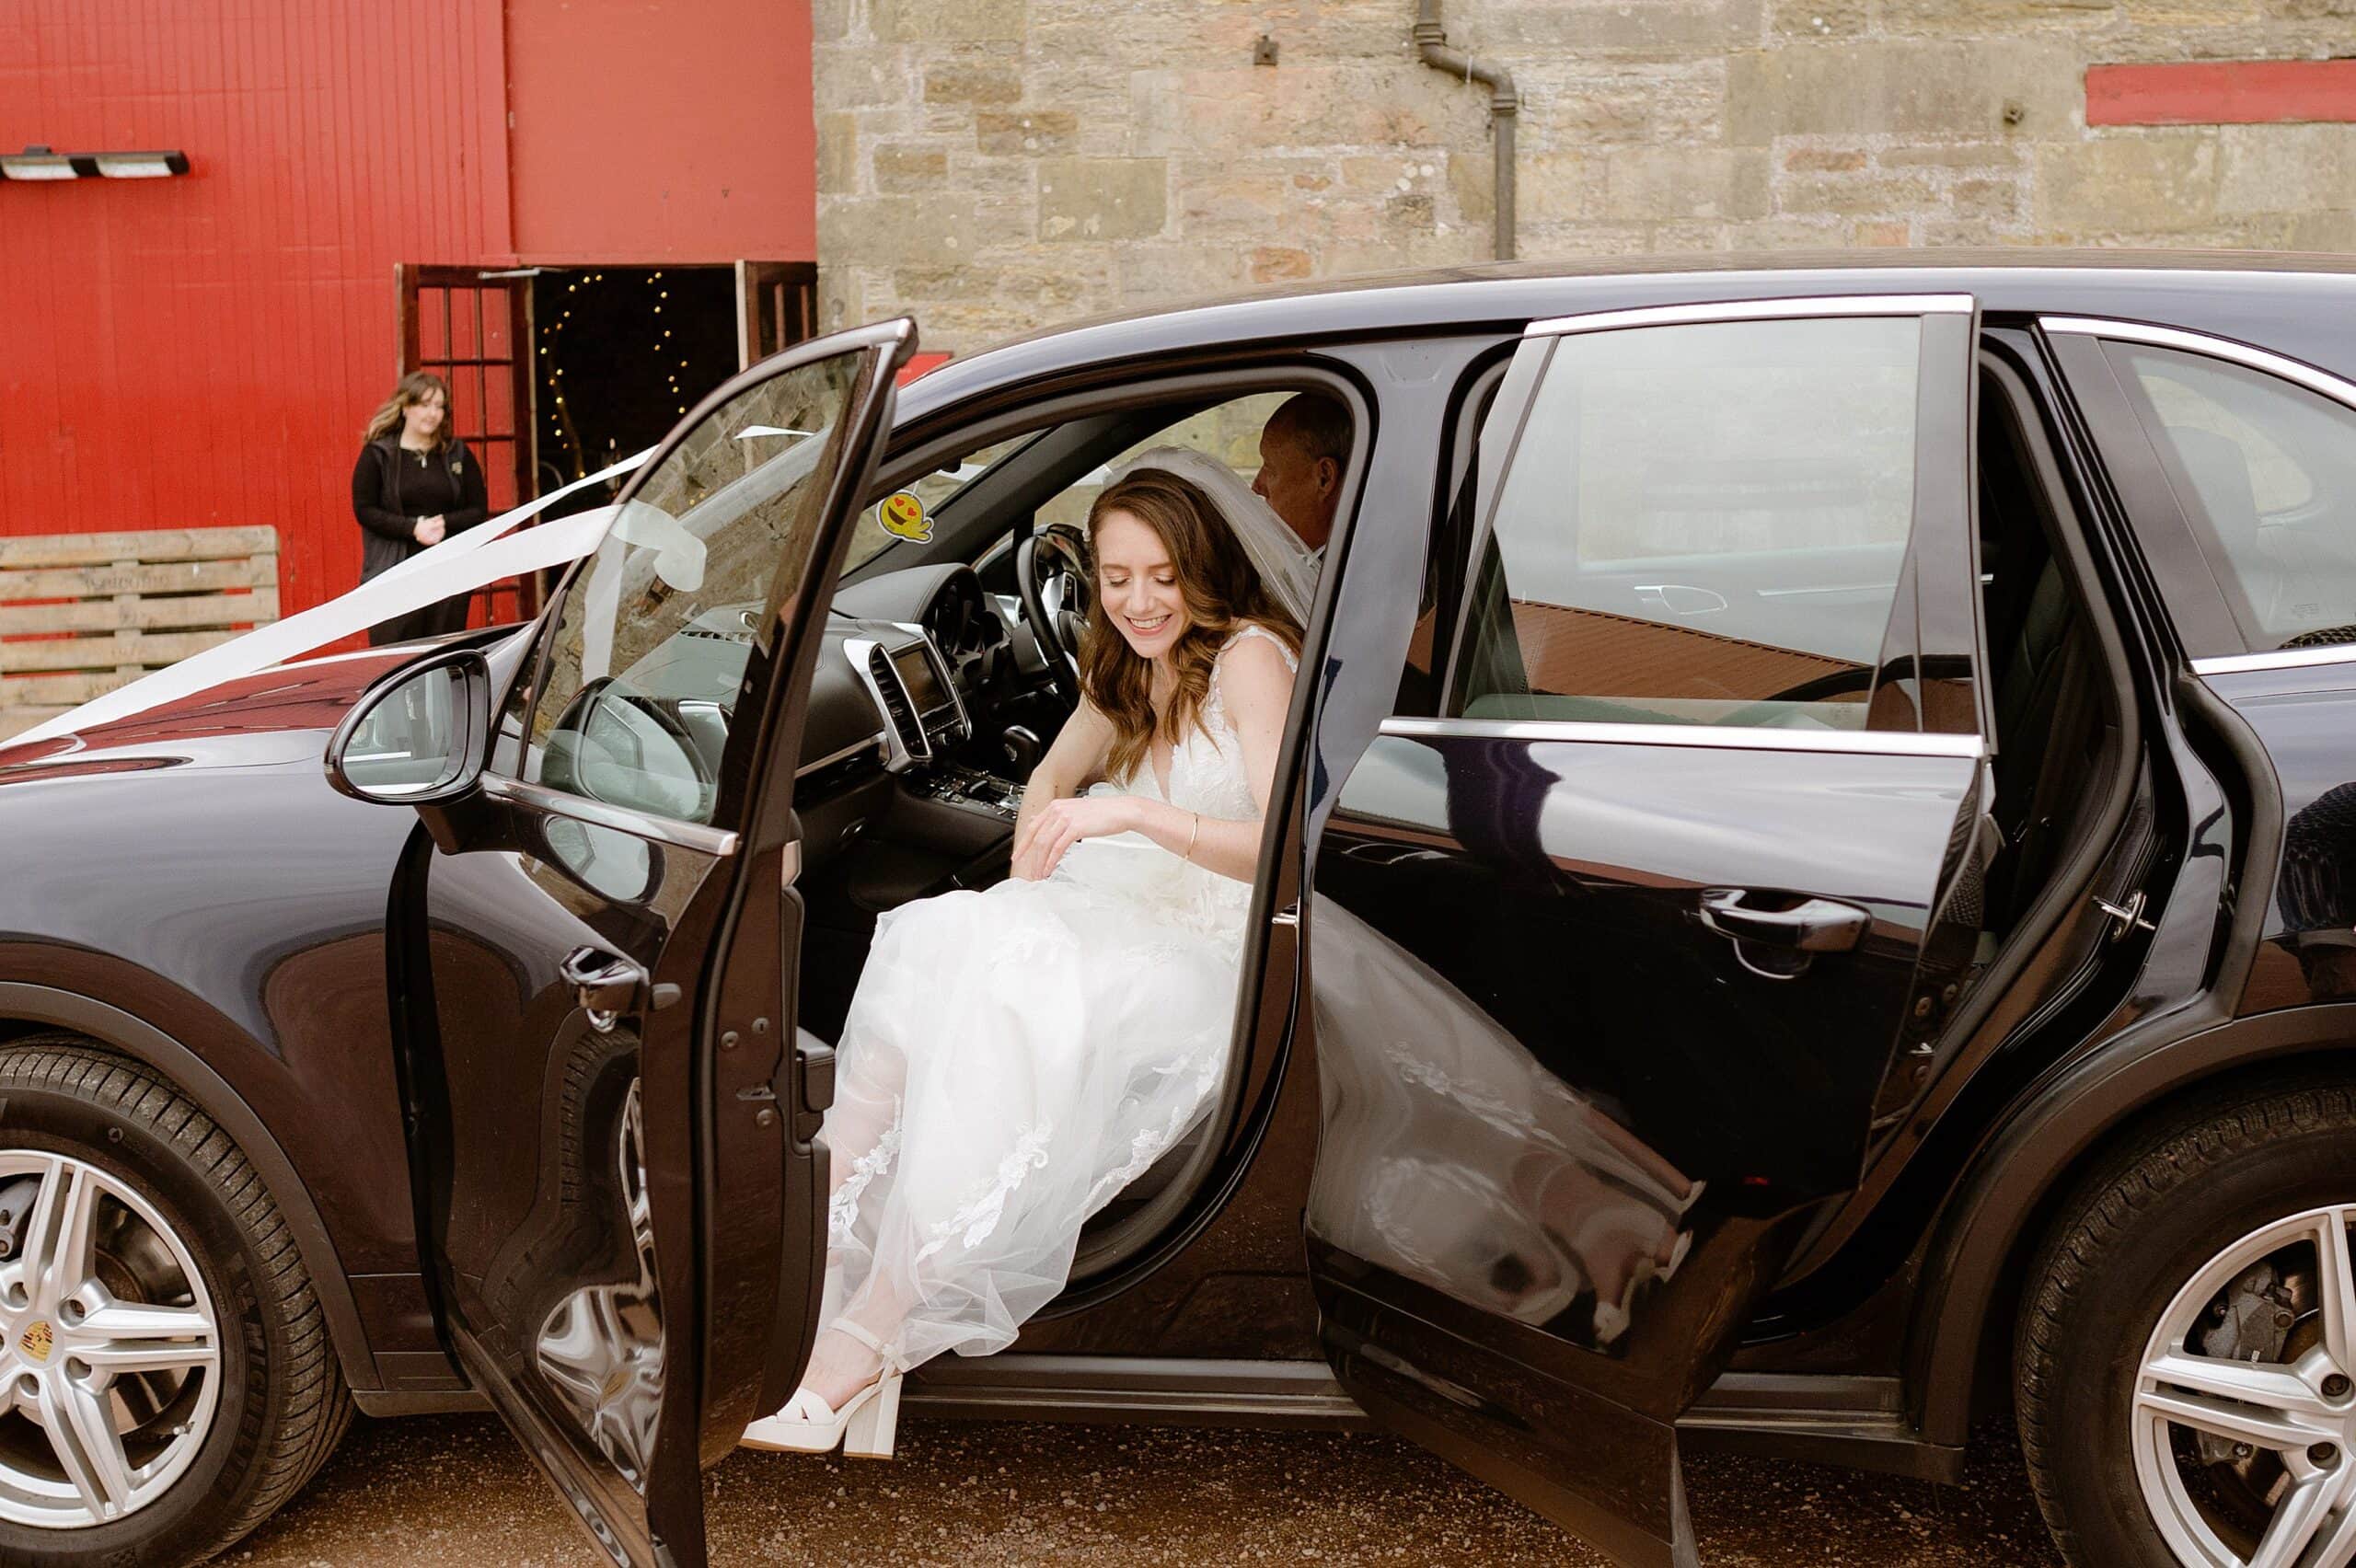 the bride stepping out of the wedding car at a unique barn wedding venue in scotland captured by st andrews wedding photographer